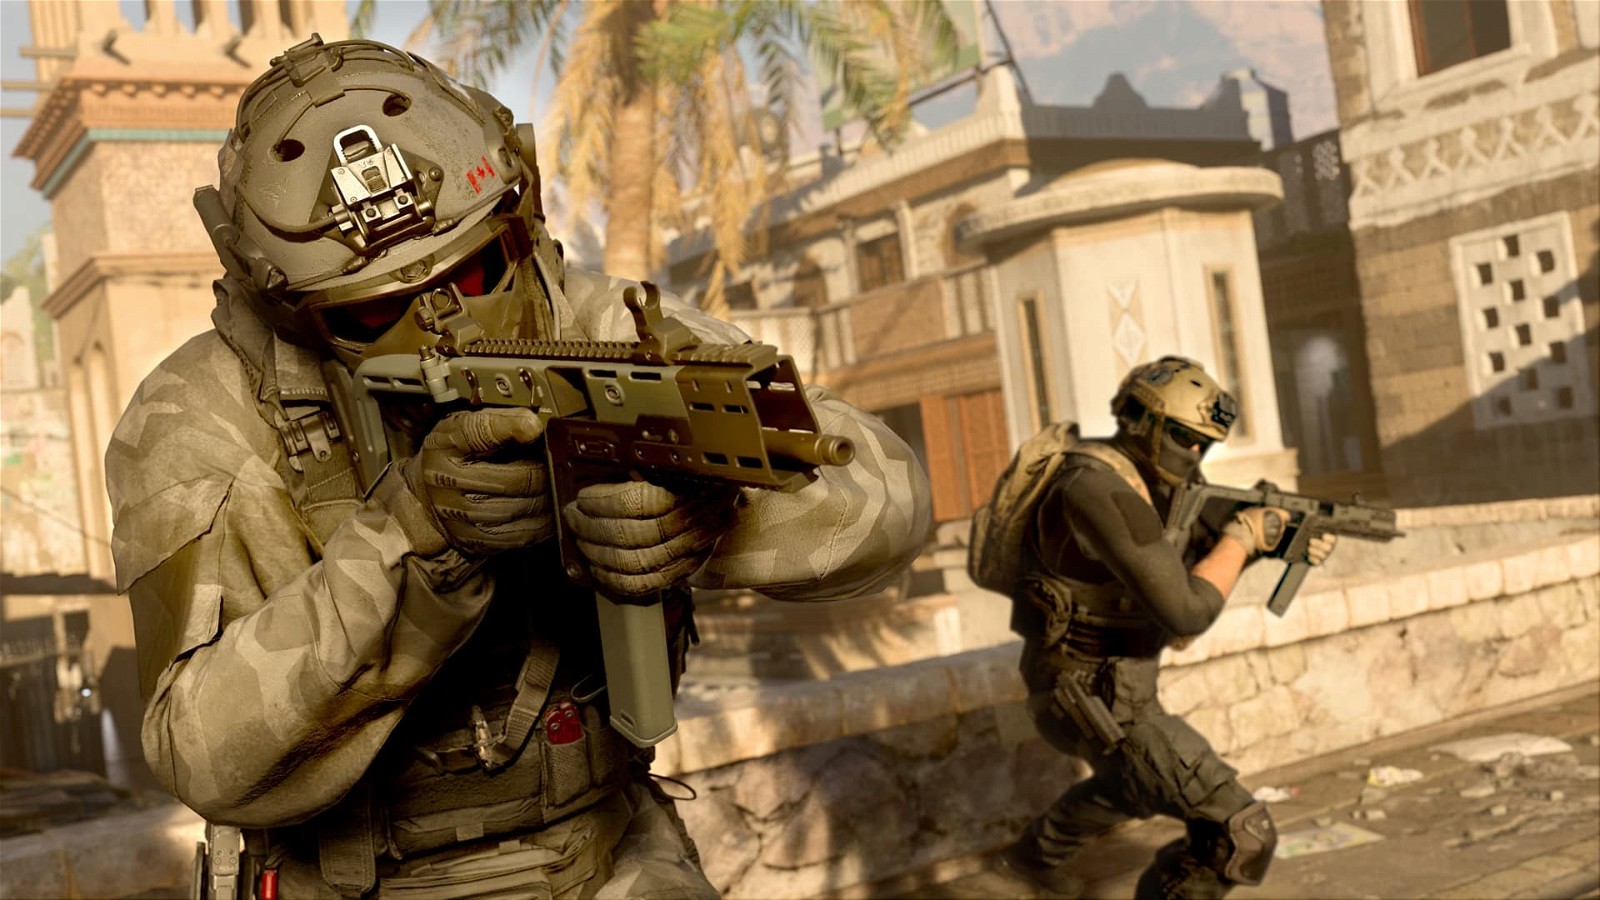 Activision has plans in place for next Call of Duty games till 2027